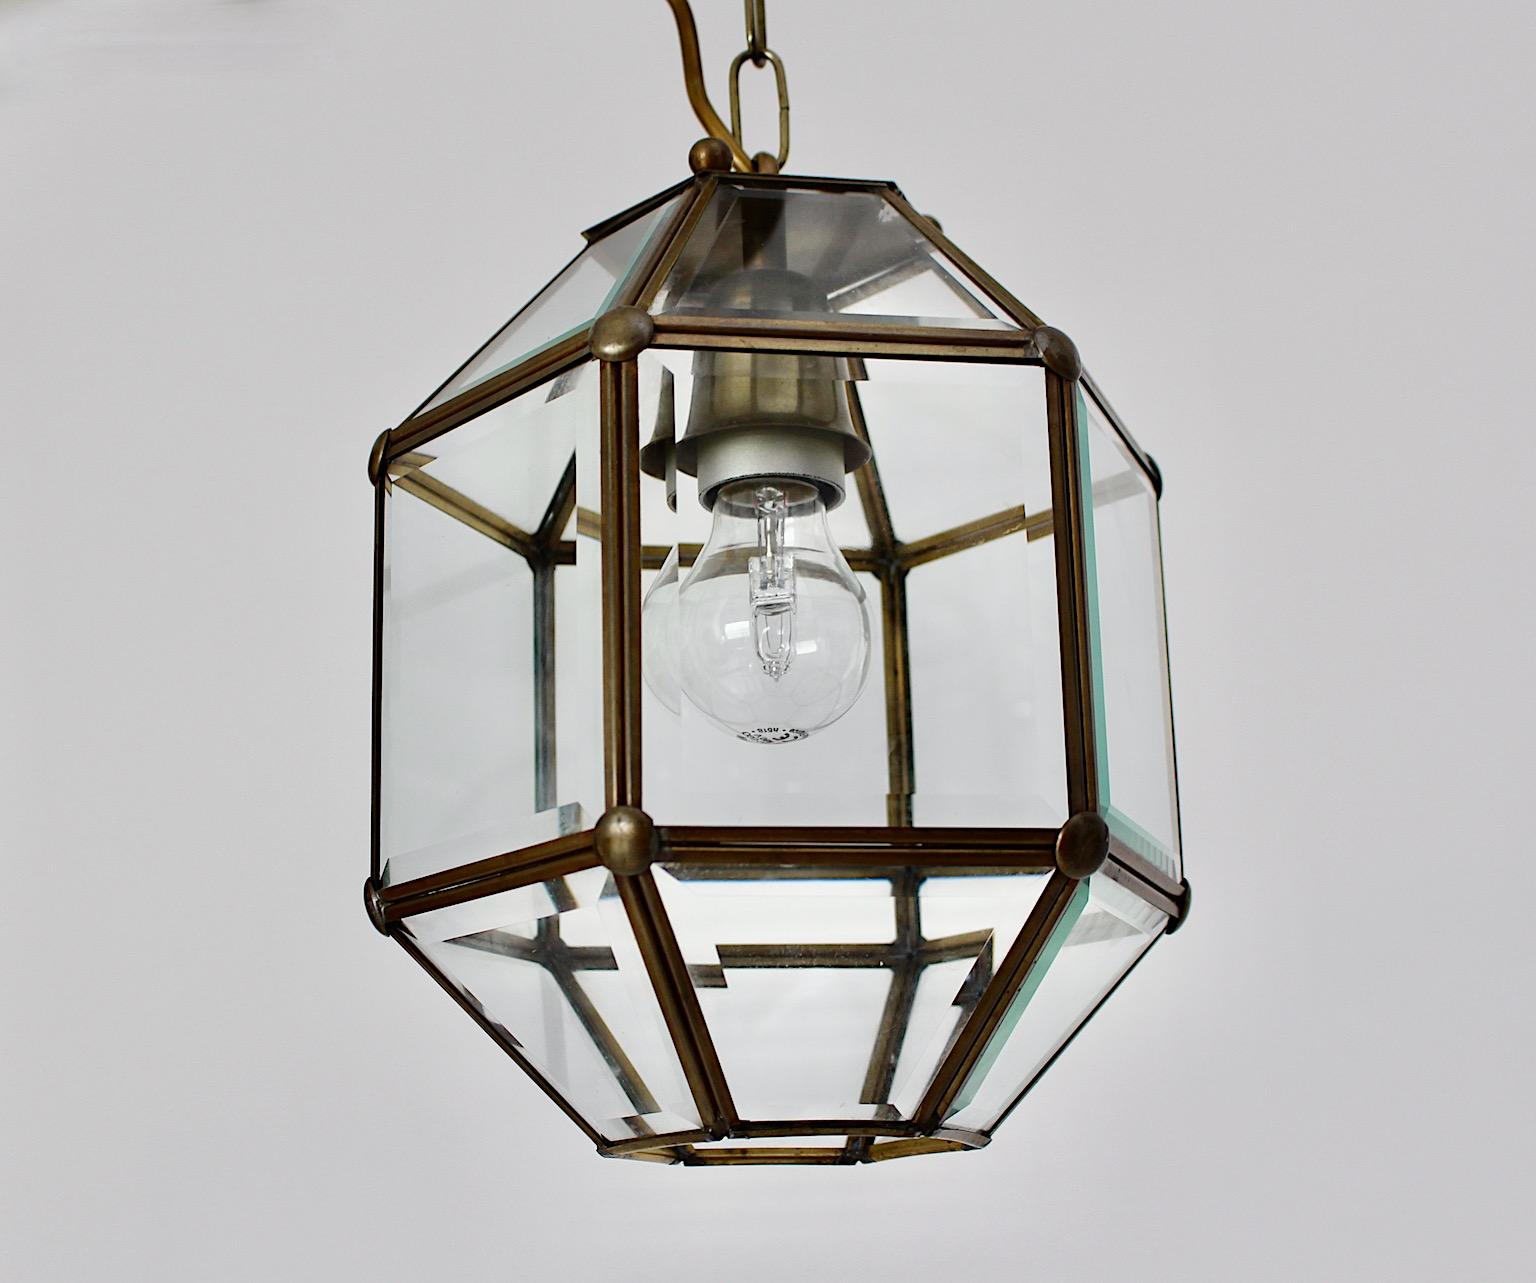 Art Deco vintage hanging lamp pendant lantern chandelier Adolf Loos style from brass and facetted clear glass 1930s Austria.
The stunning and clear cut Art Deco pendant shows eighteen facetted clear glasses in a brass frame. 
Although minimal in